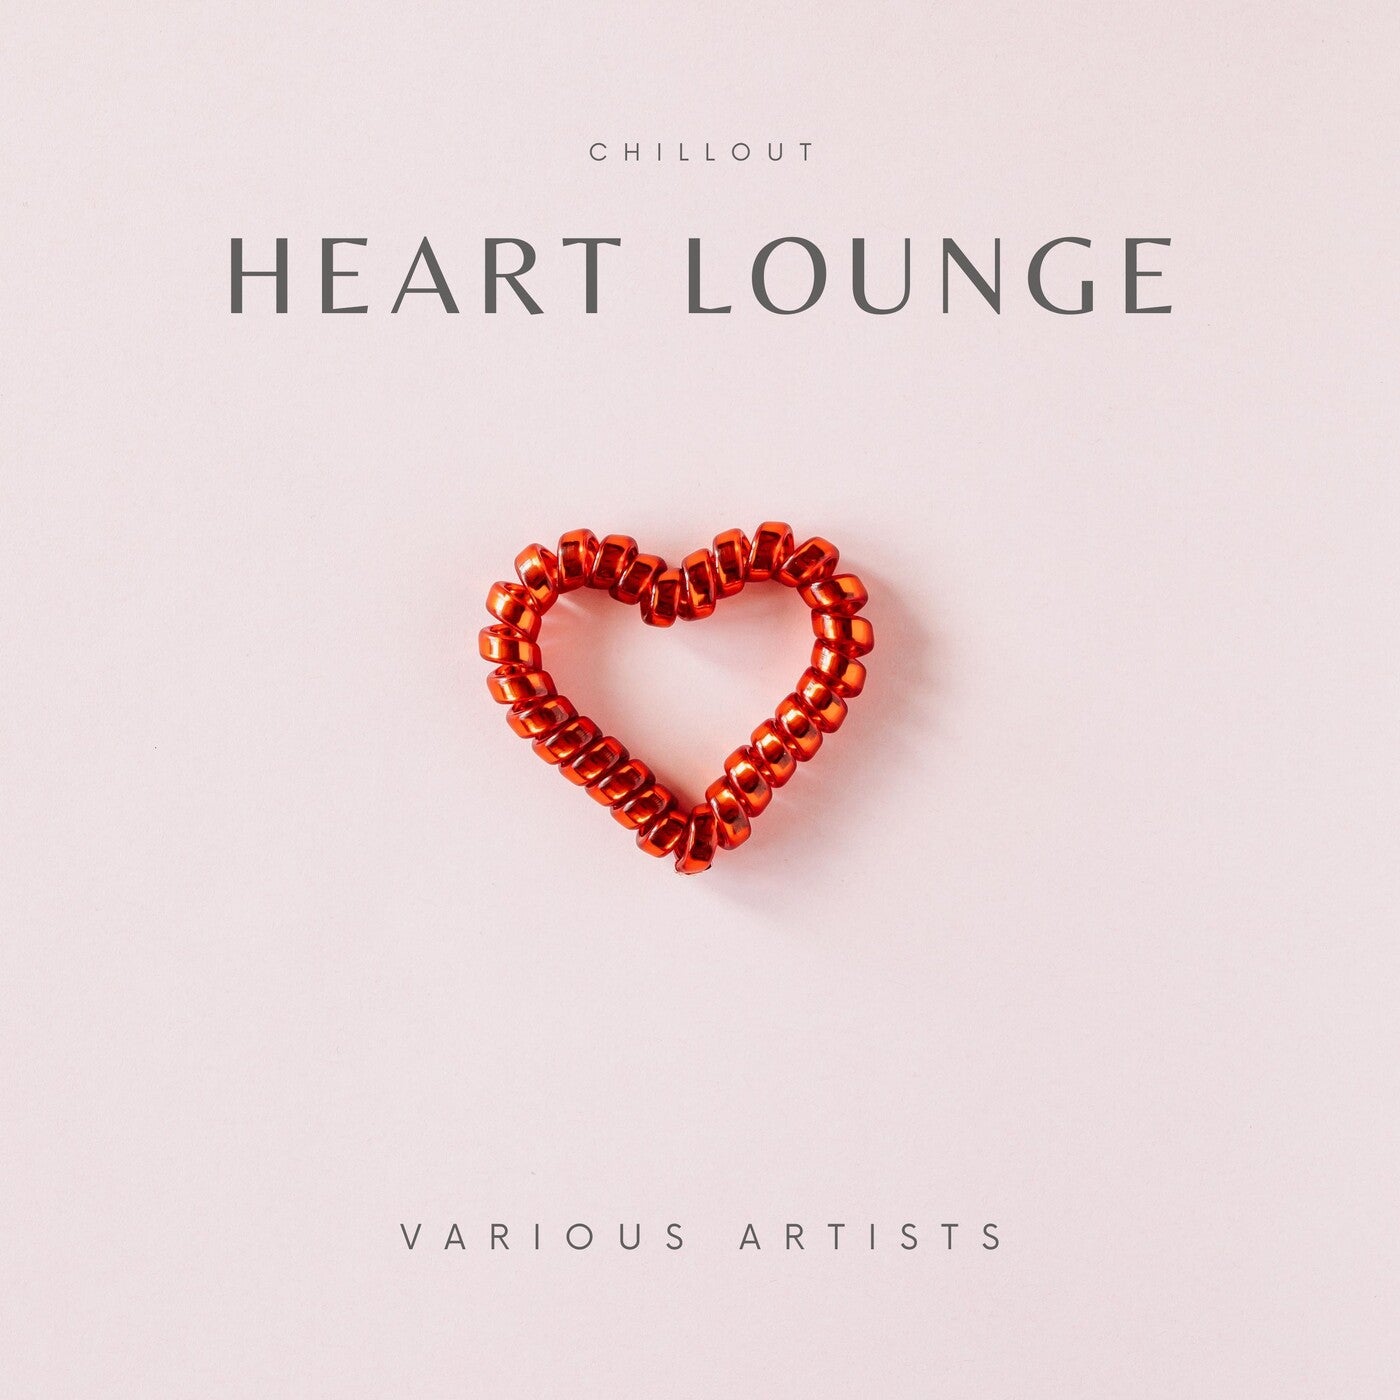 Chillout Heart Lounge